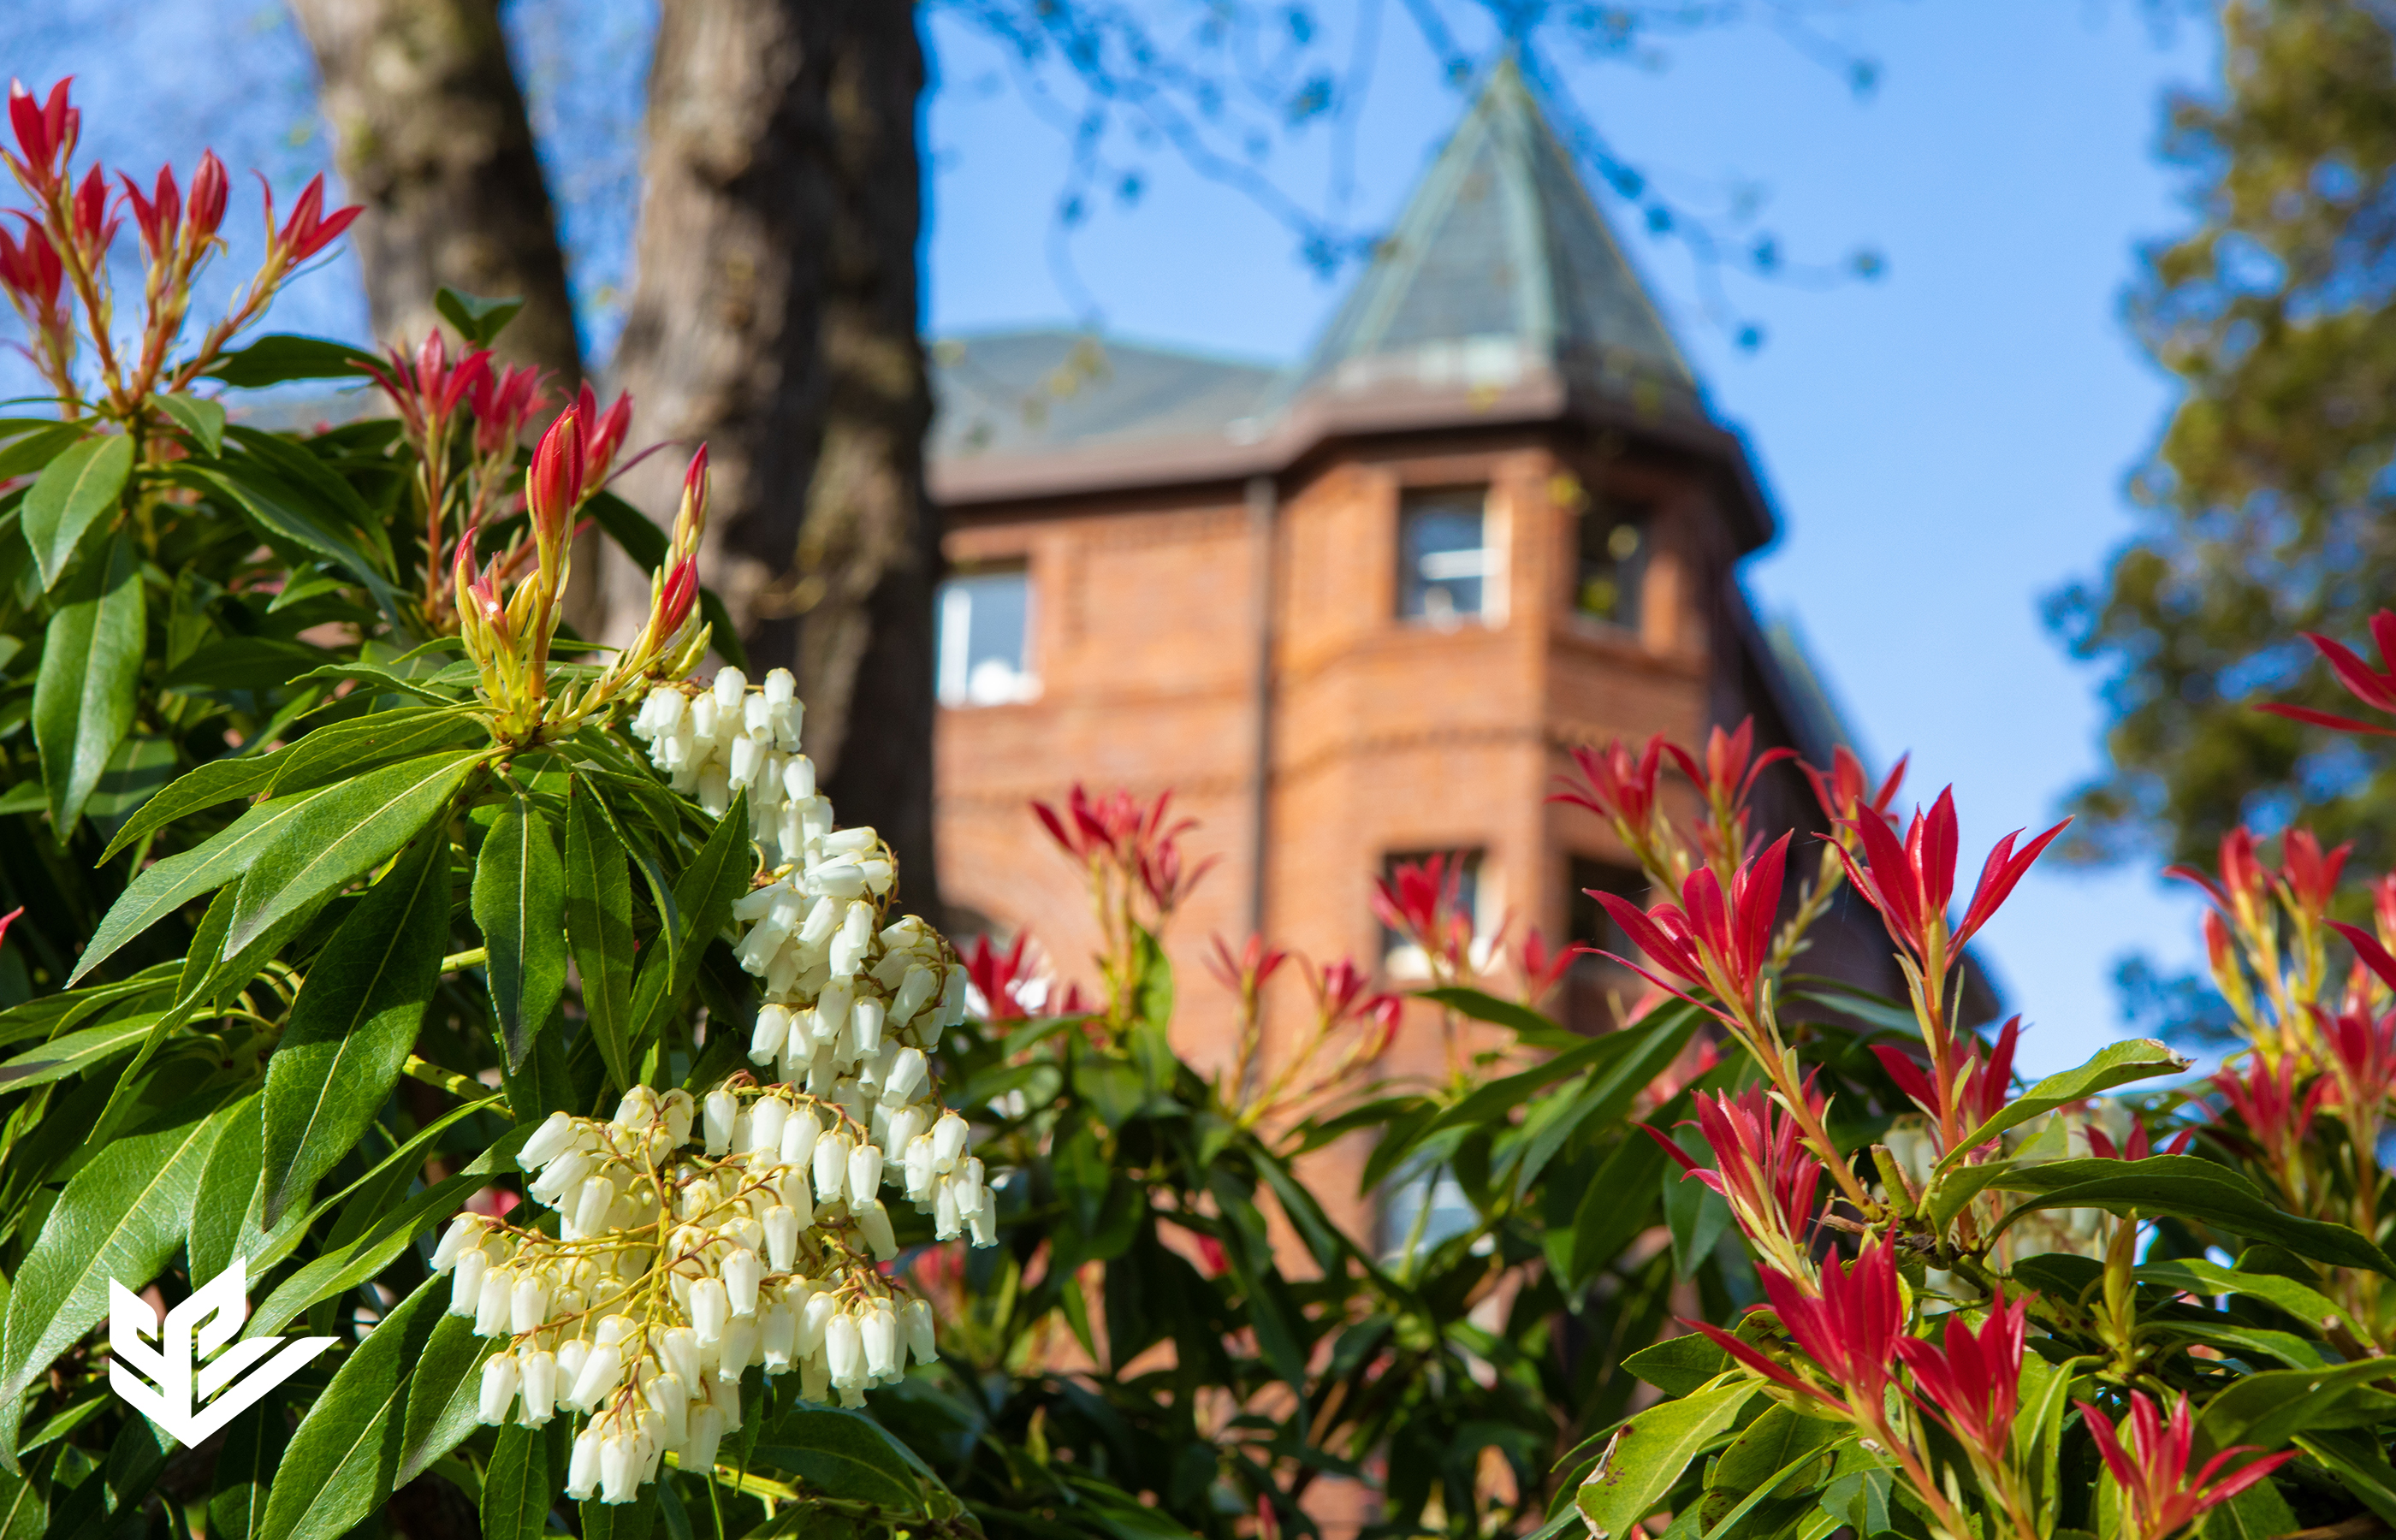 A campus image with summer foliage in the foreground and historic Alexander and Adelaide Hall in the background at Seattle Pacific University